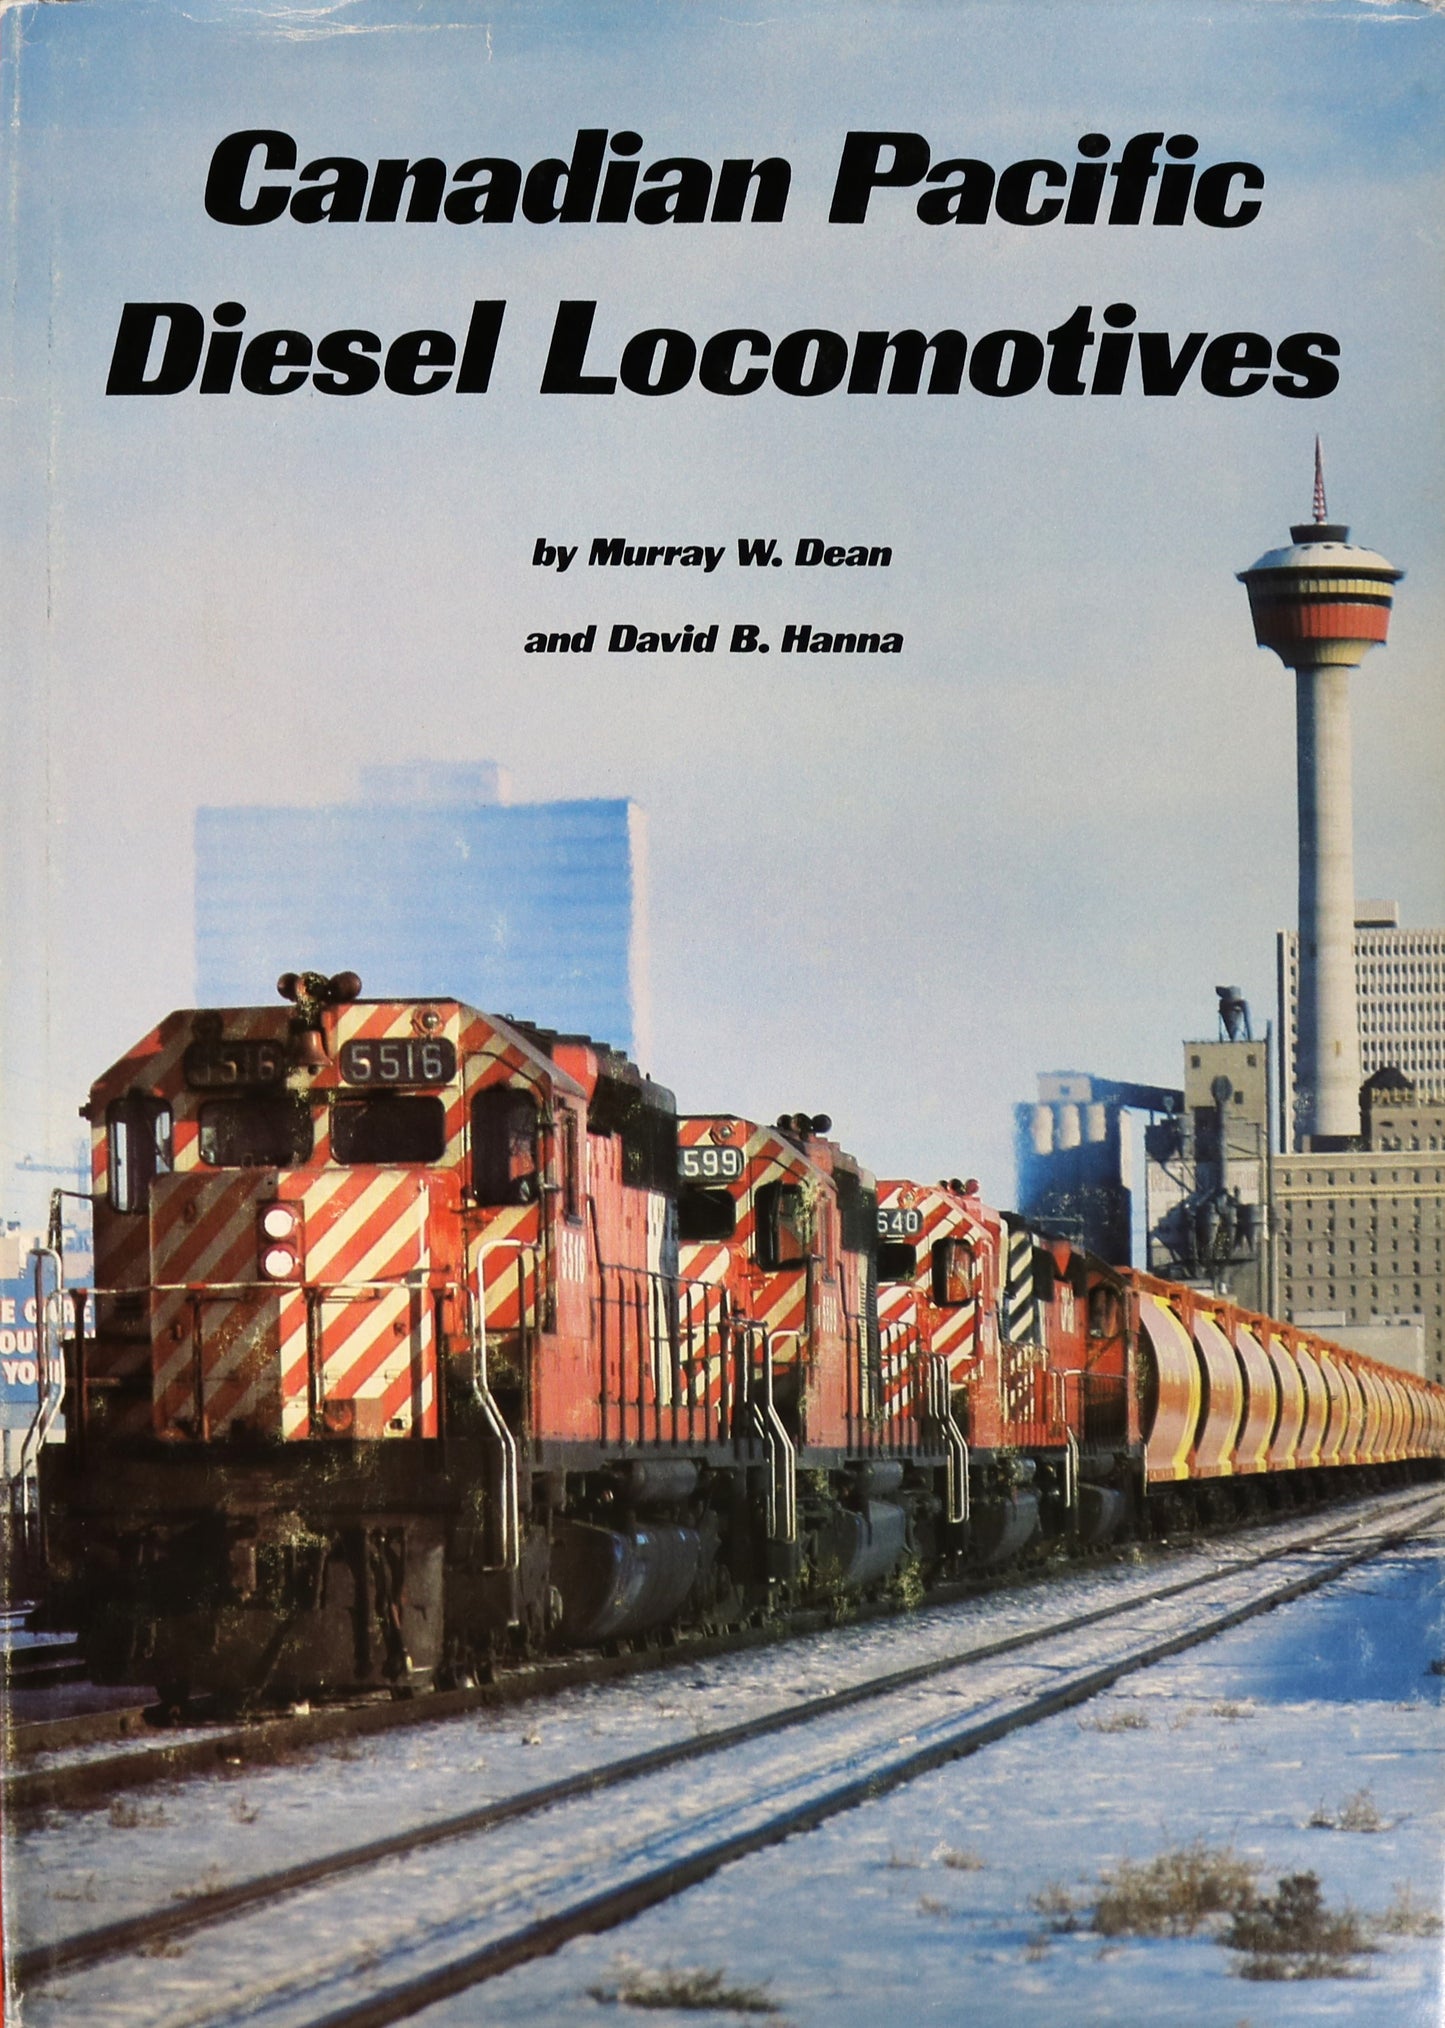 Canadian Pacific Diesel Locomotives CPR Railroad Railway Railcar History Used Book